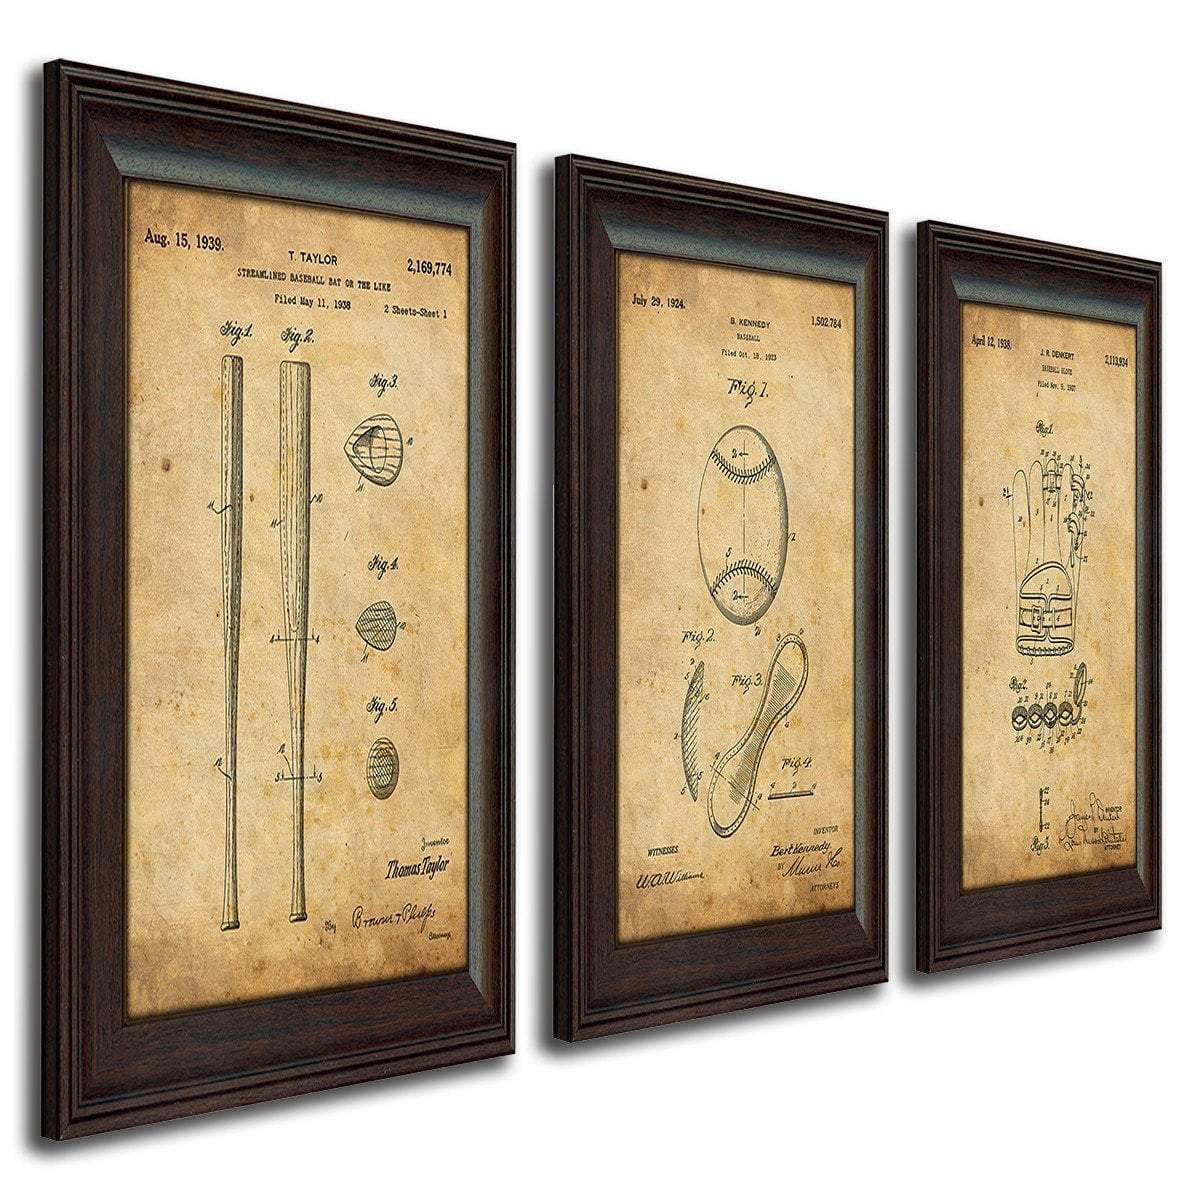 Framed patent art of the original patents for baseball, glove, and bat - Personal-Prints